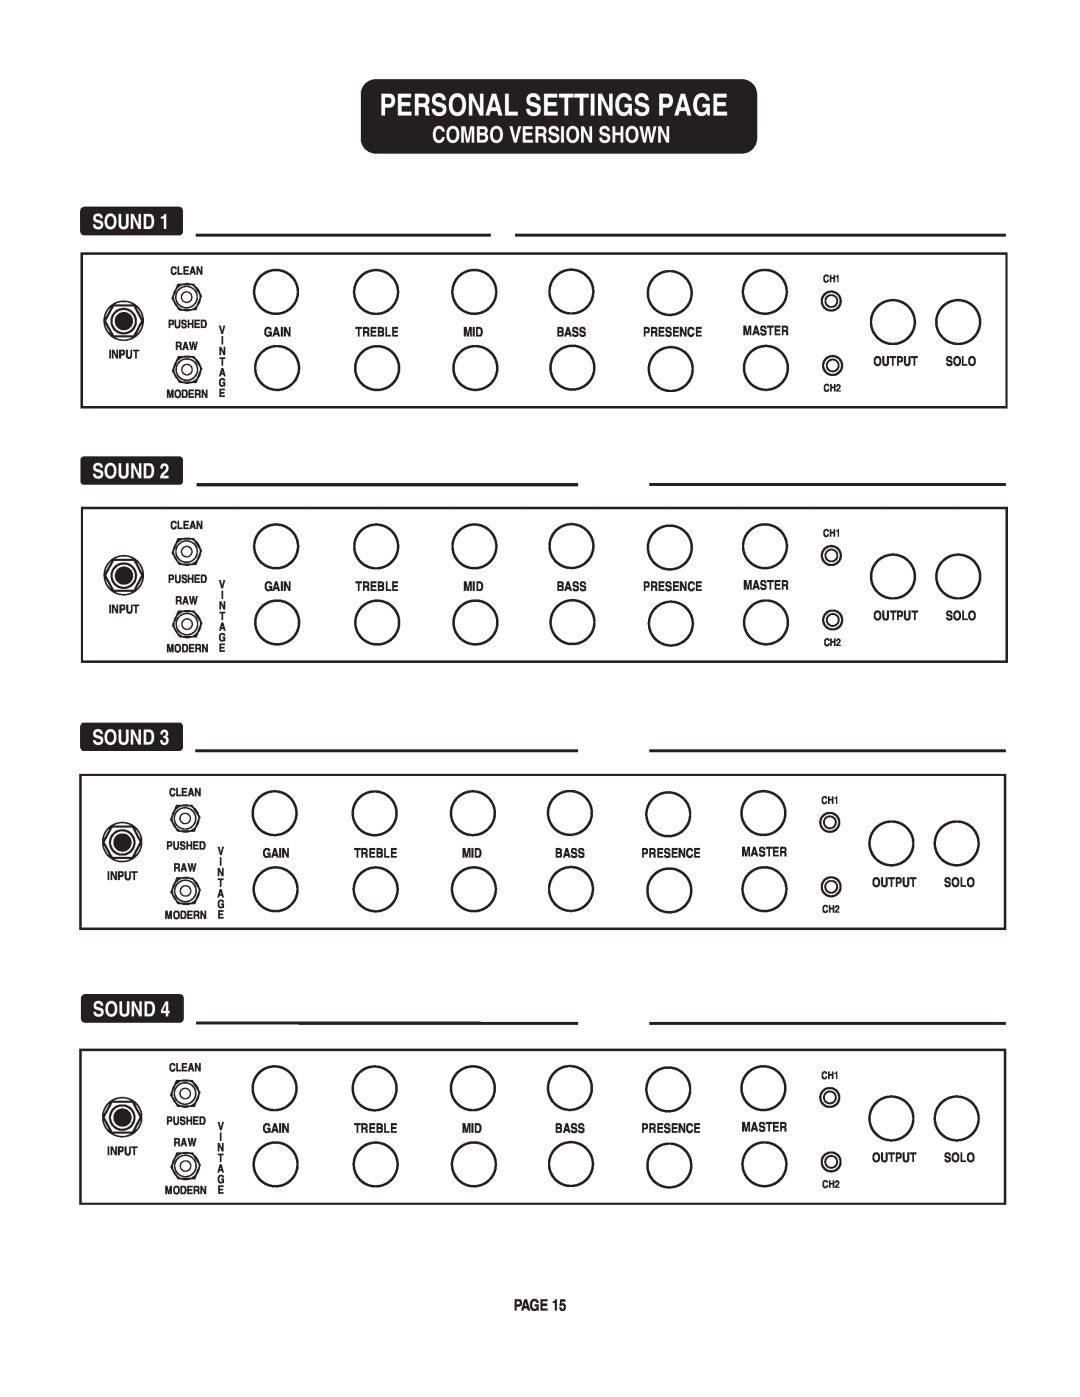 Mesa/Boogie pmn owner manual Combo Version Shown, Personal Settings Page, Sound 